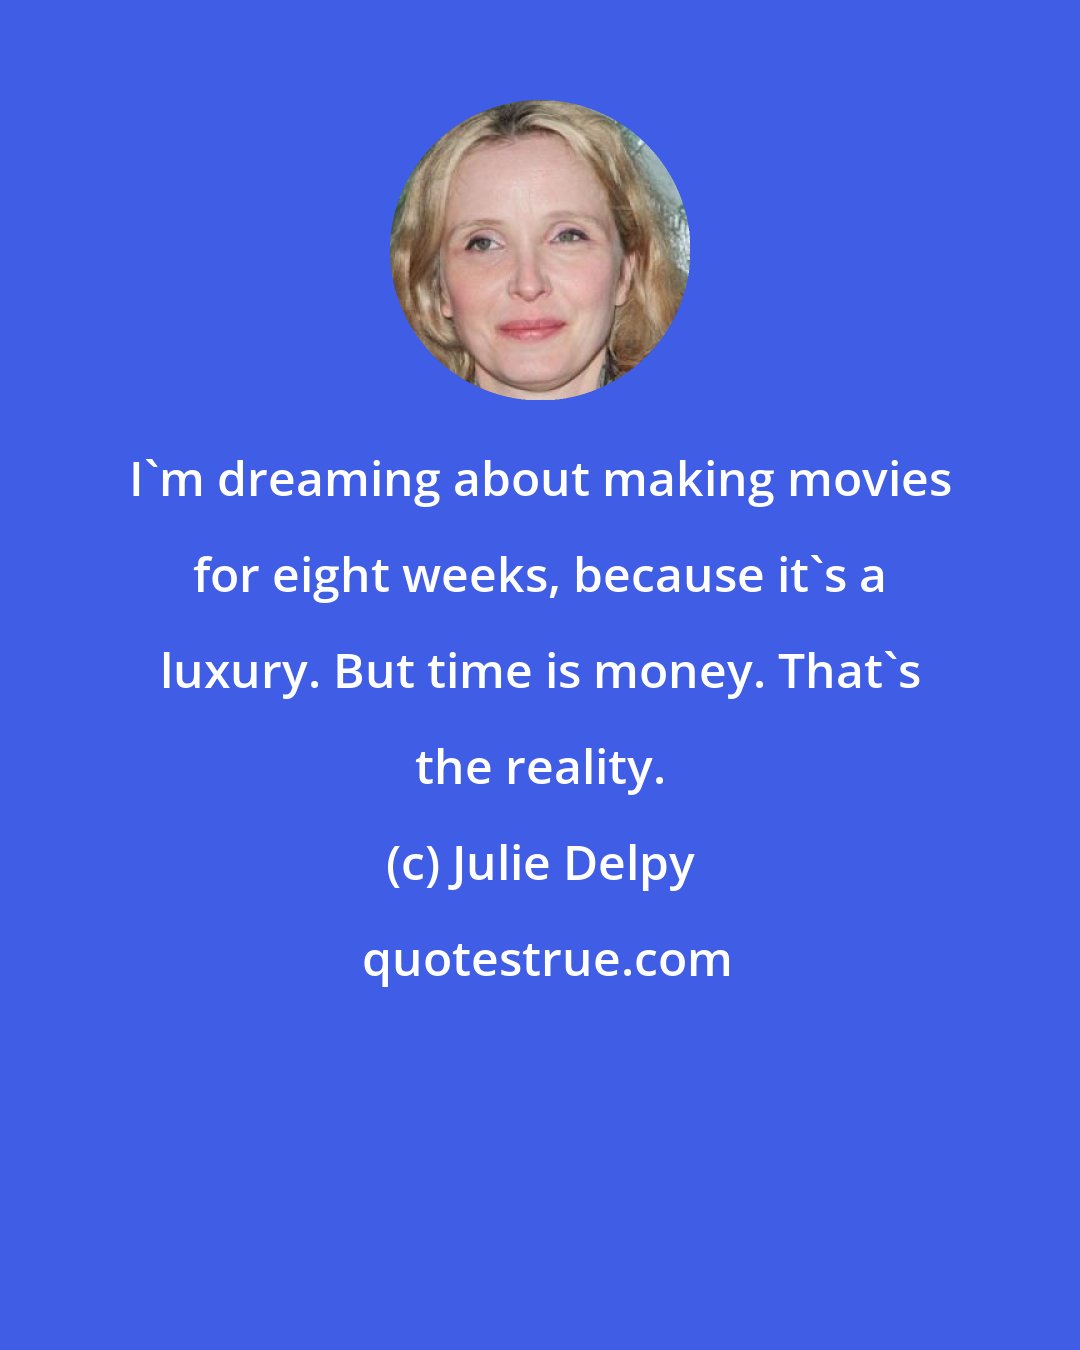 Julie Delpy: I'm dreaming about making movies for eight weeks, because it's a luxury. But time is money. That's the reality.